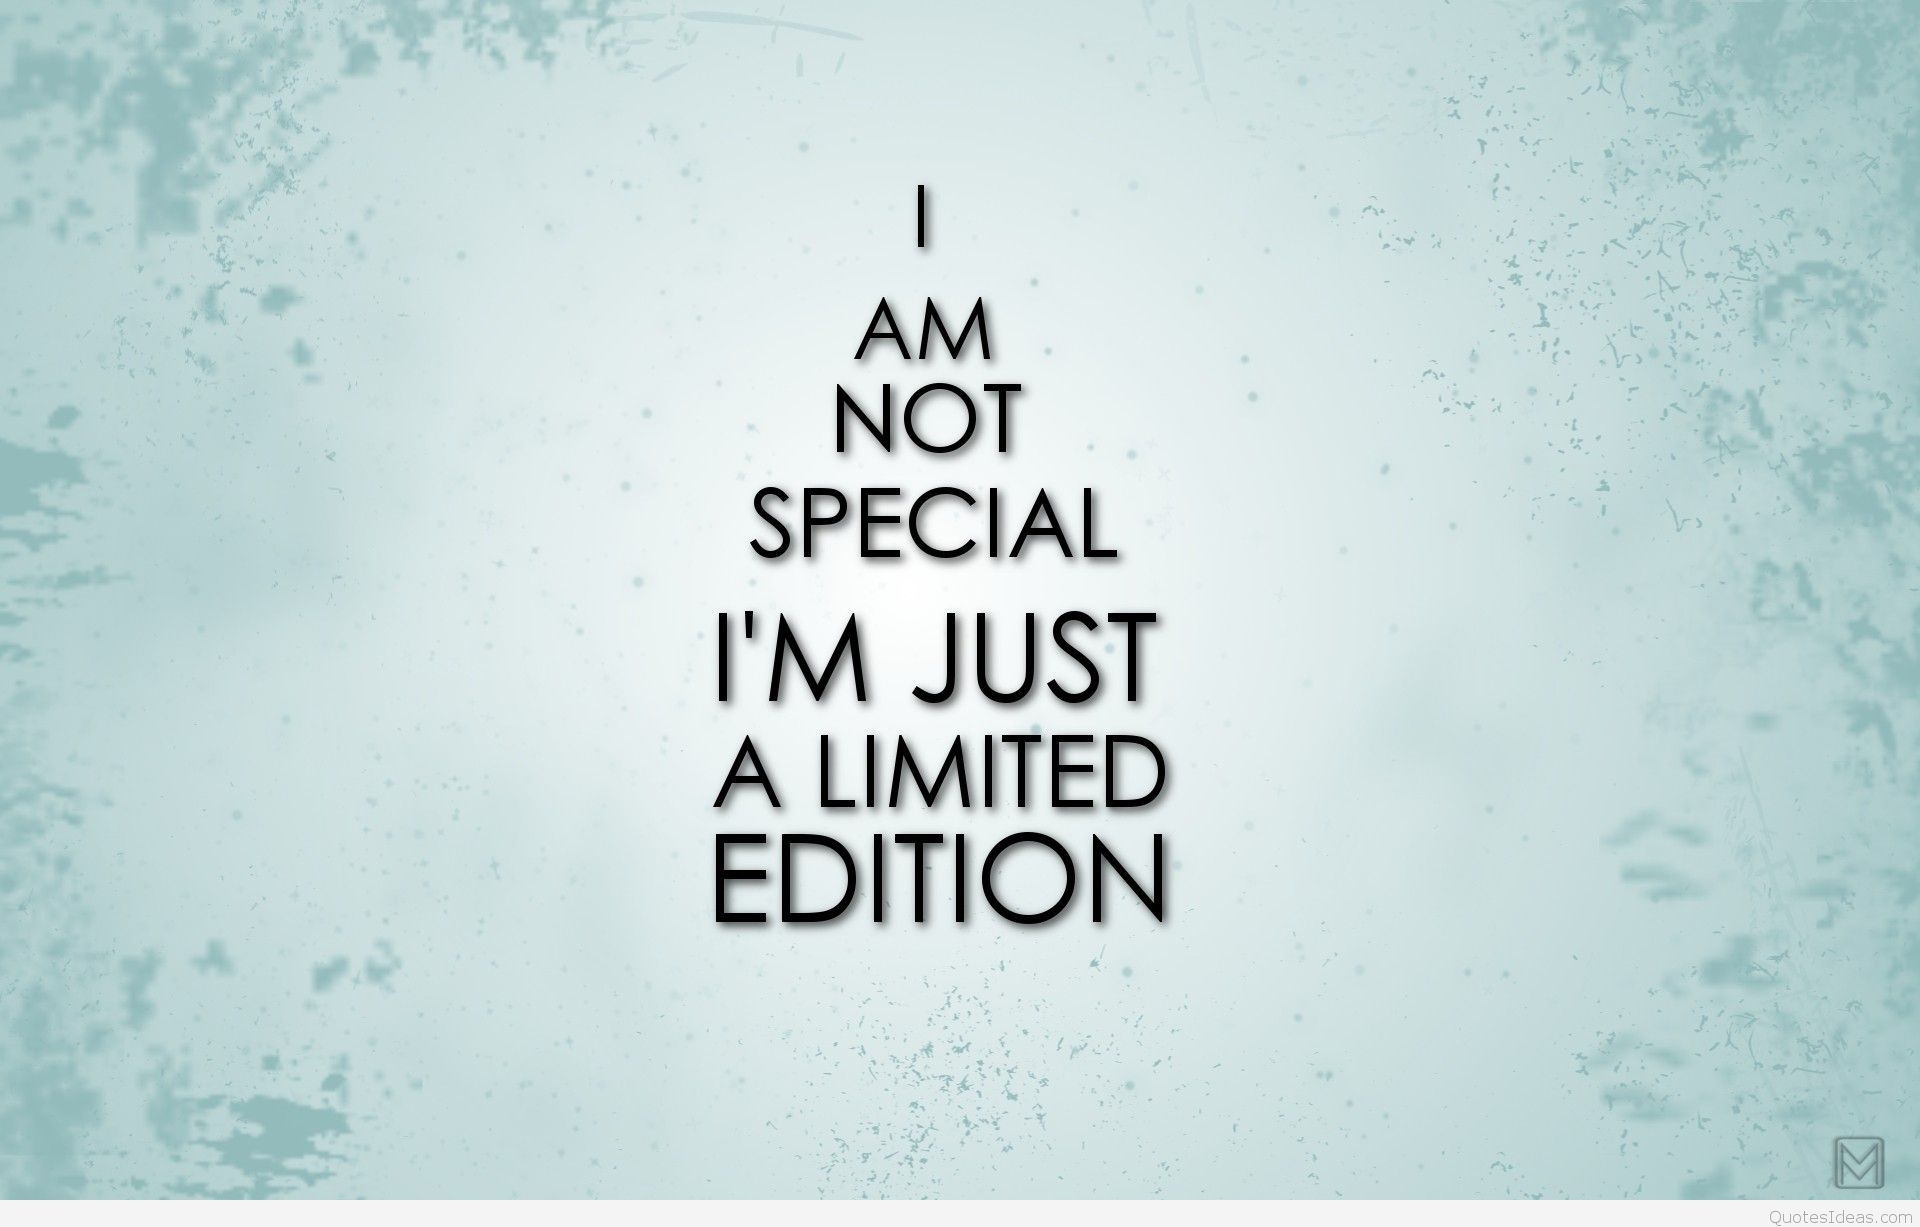 Iam not special funny quotes wallpapers hd wallpaper religion photo quotes wallpaper